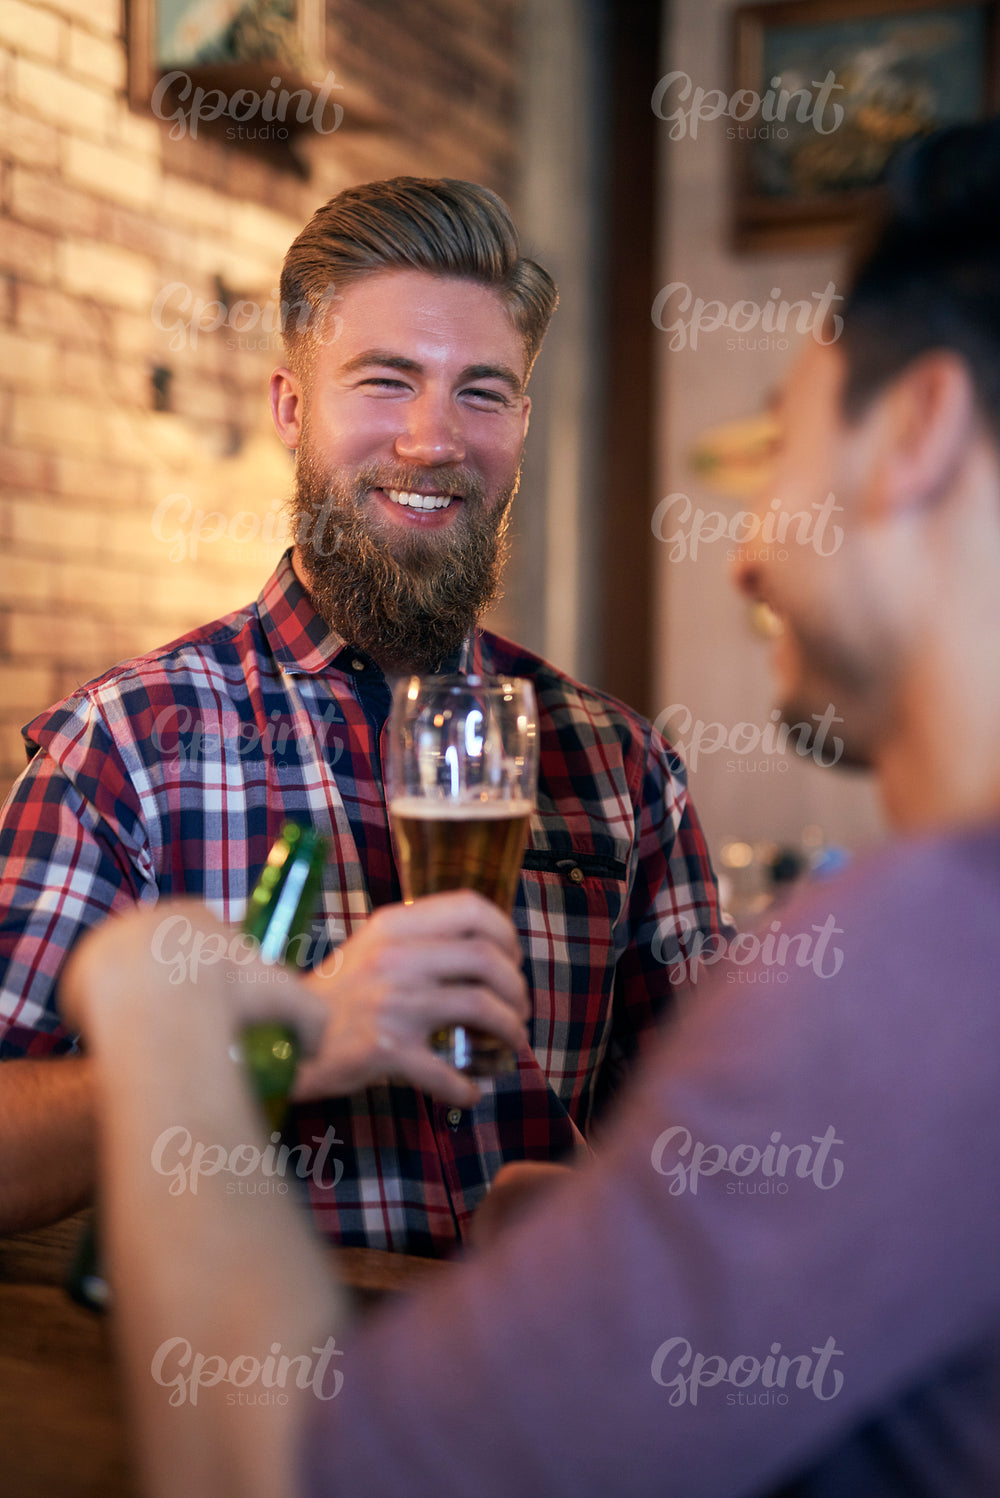 Portrait of smiling man drinking beer in the pub